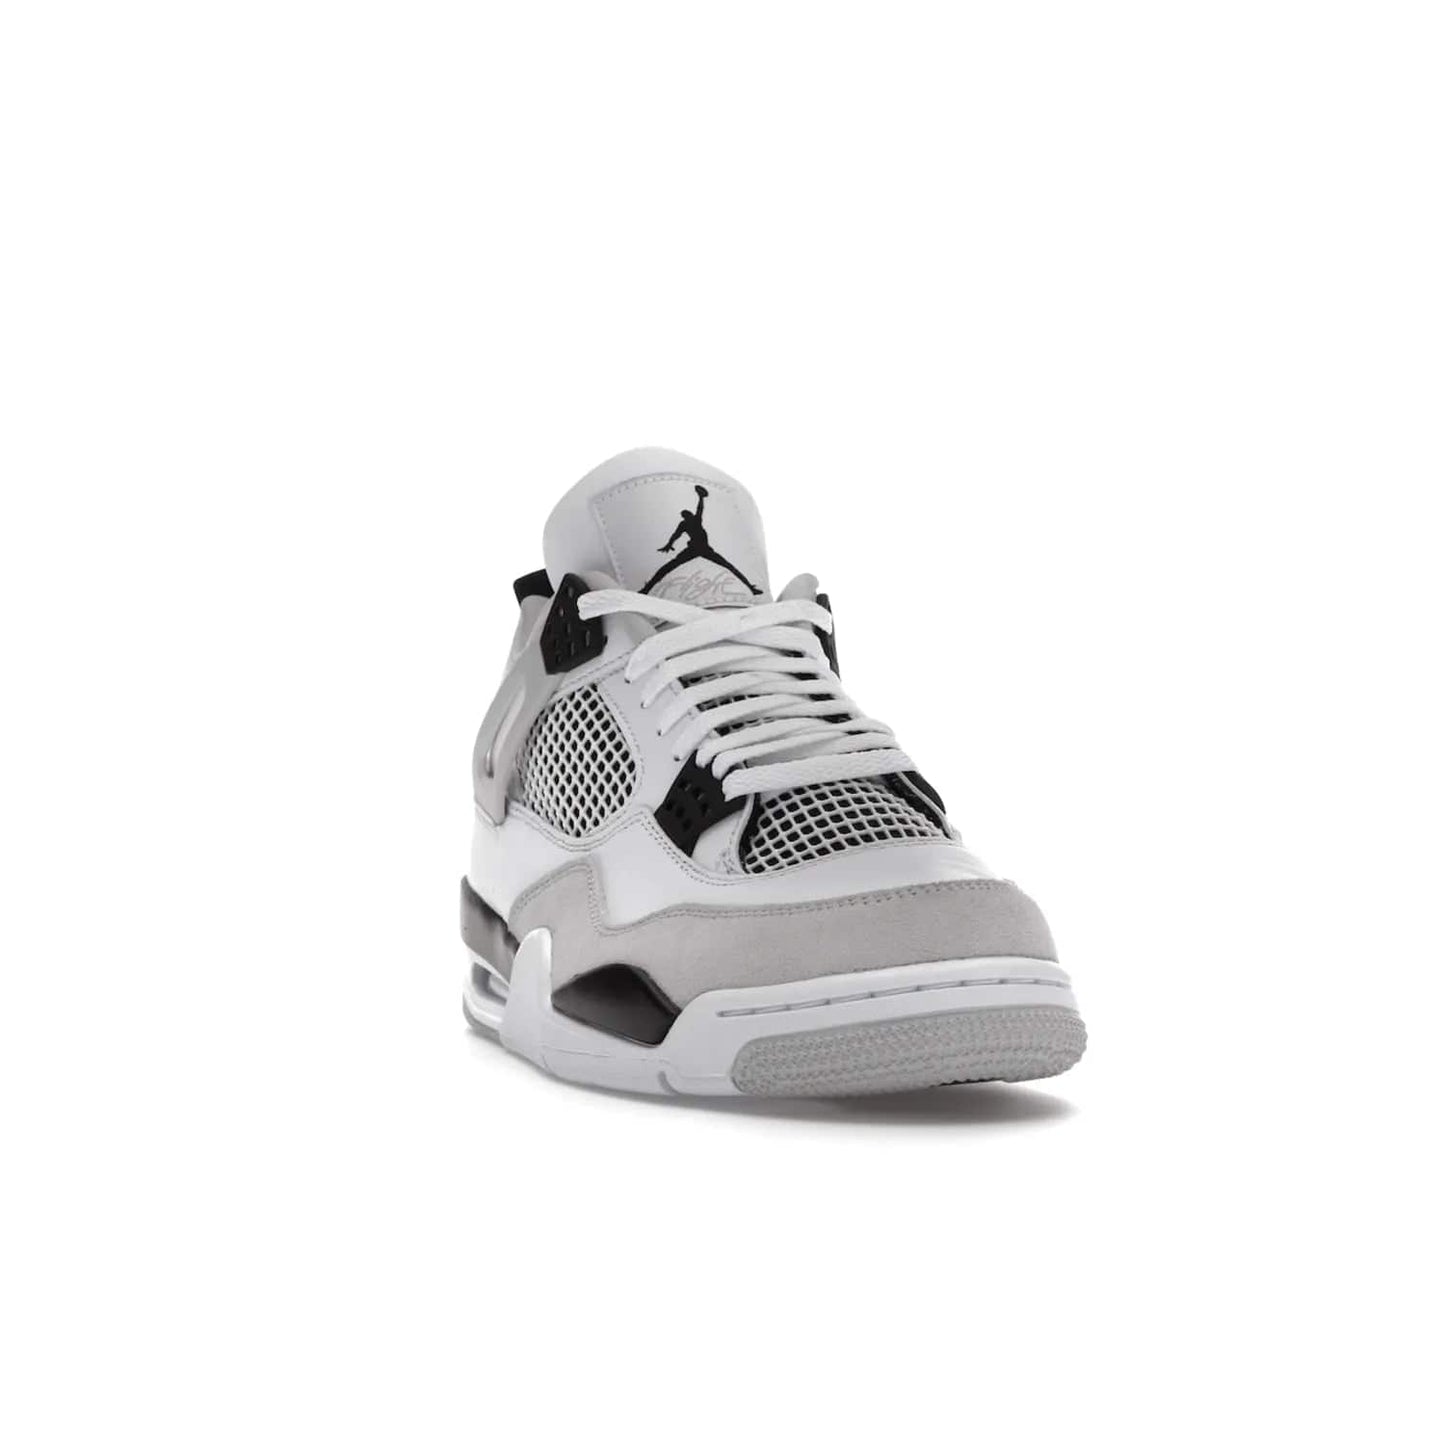 Jordan 4 Retro Military Black - Image 8 - Only at www.BallersClubKickz.com - Updated Air Jordan 4 style with a white/black/light grey sole and visible Air unit. Released in May 2022, offering timeless classic style and comfort.